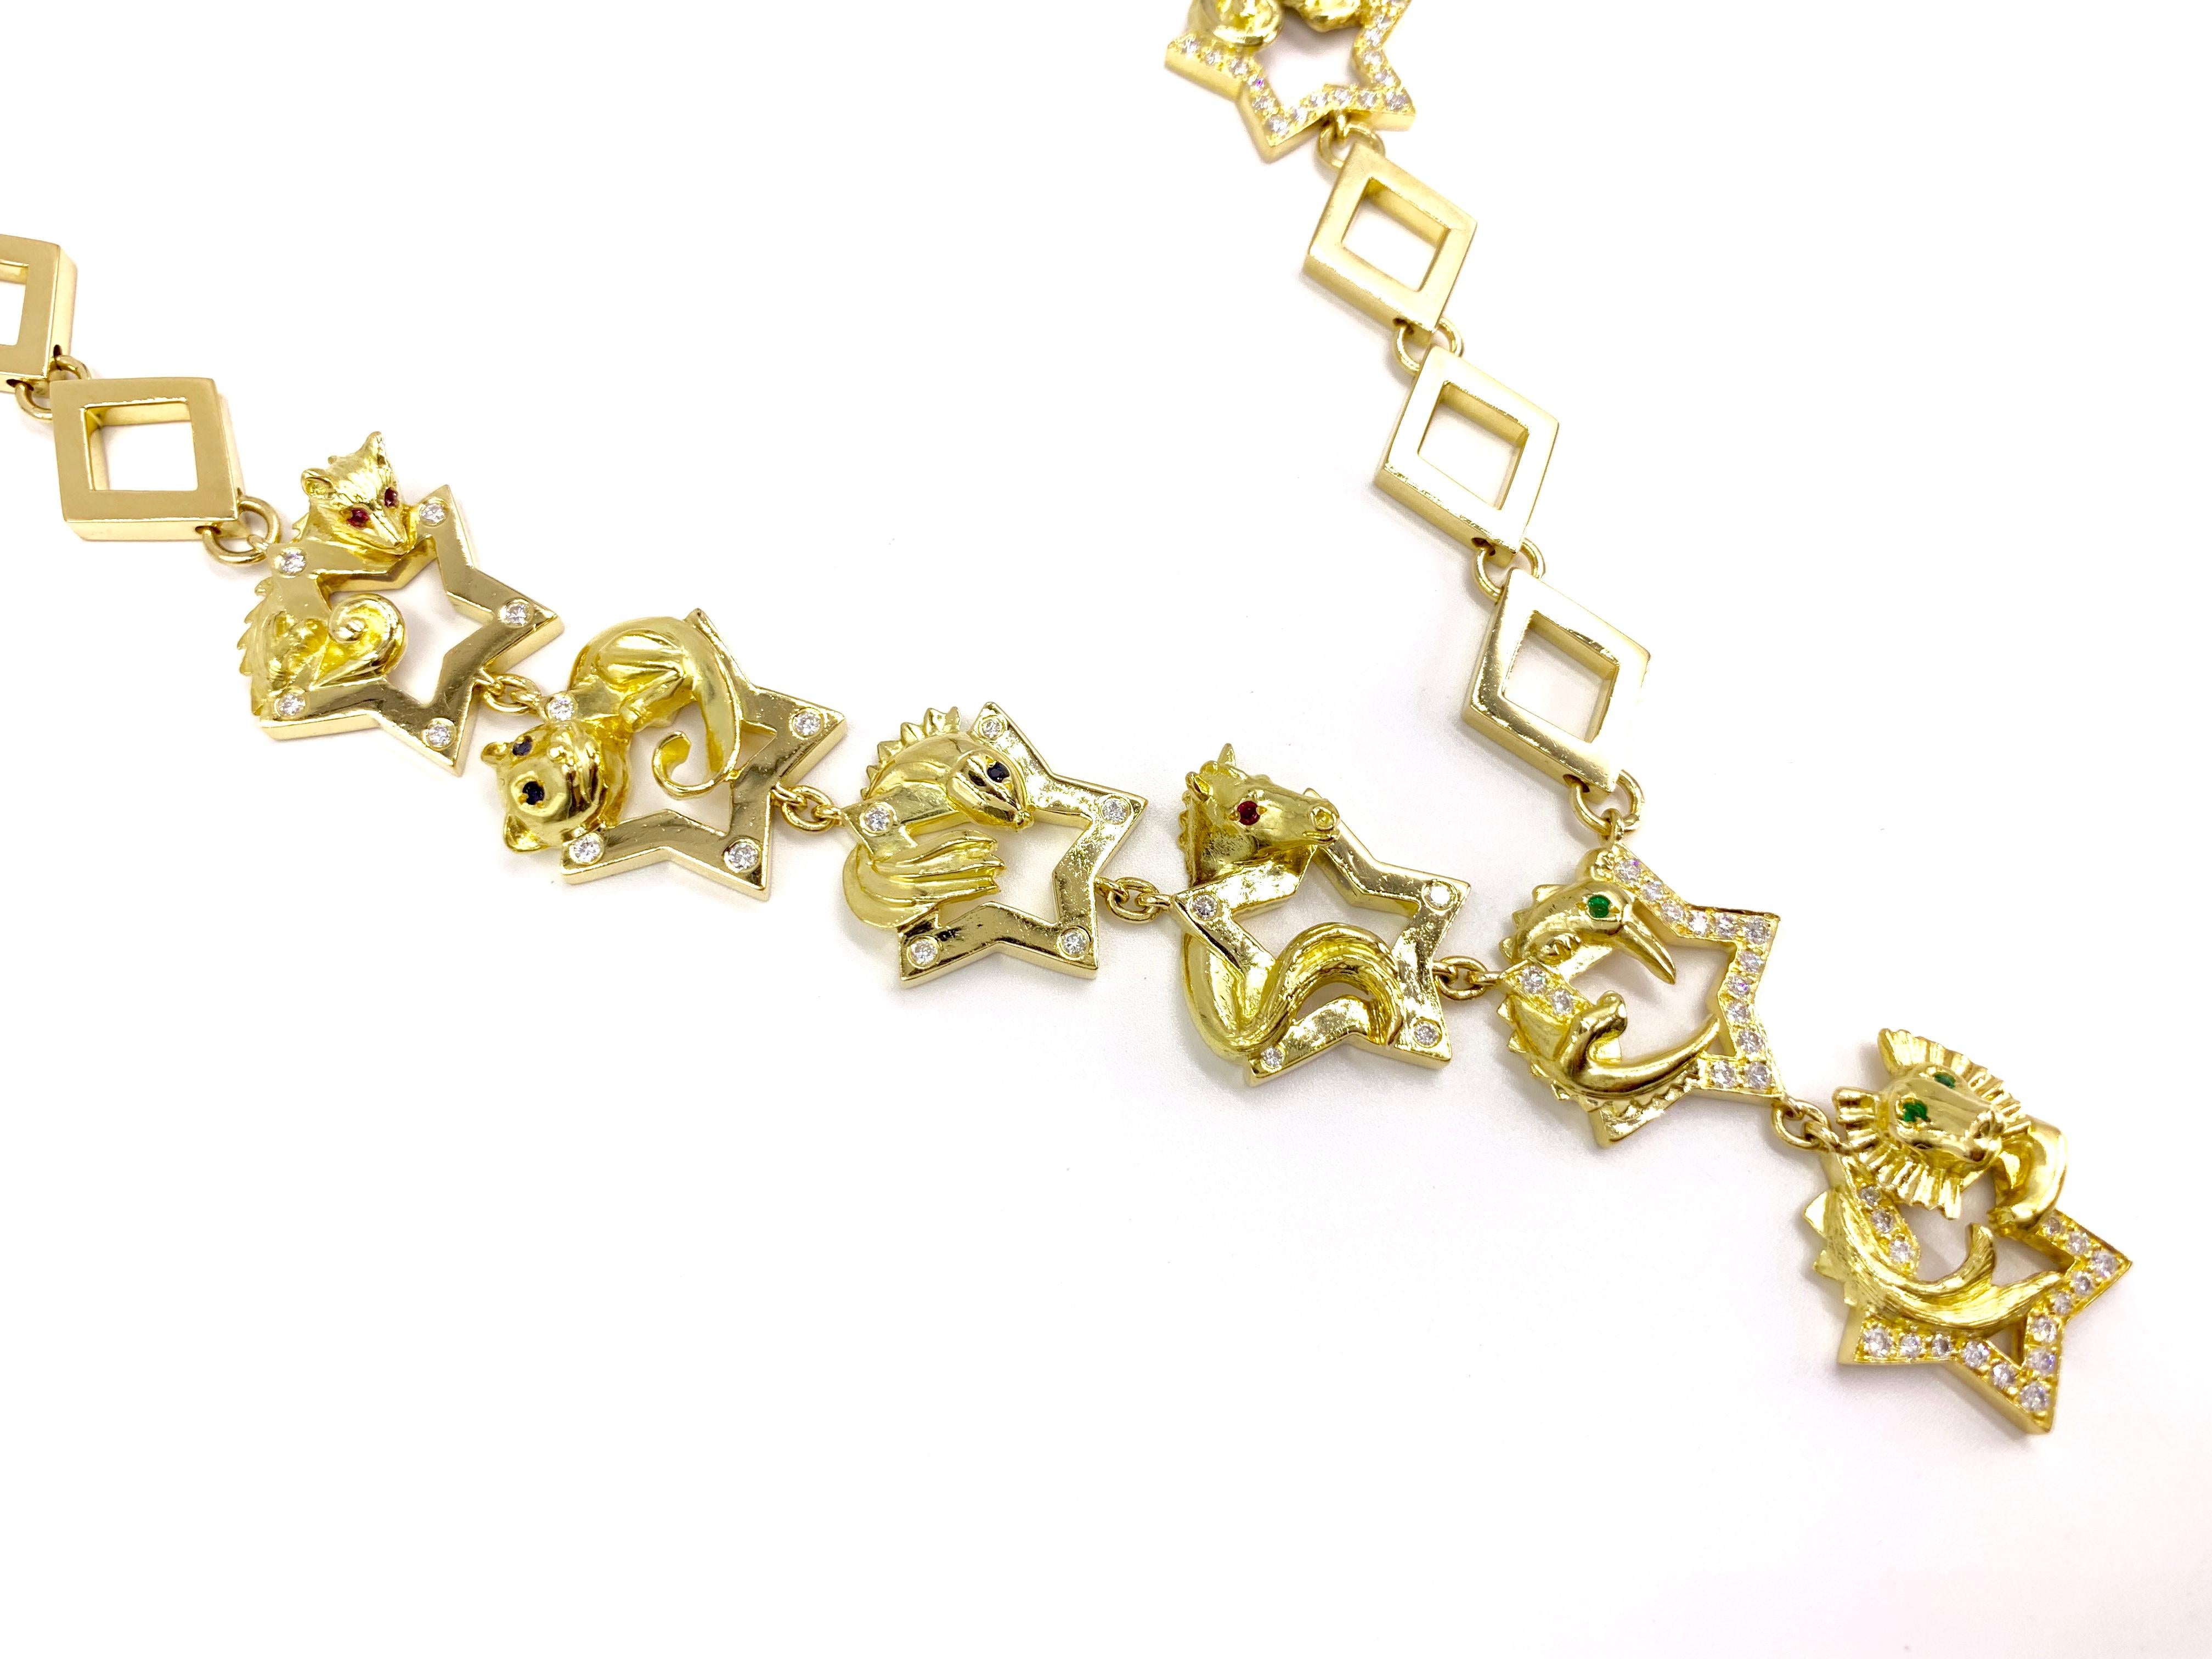 A substantial 18 karat modern animal themed yellow gold lariat style necklace expertly crafted by Charles Turi Jewelry Co. Necklace features seven different adorable carved animals resting upon stars adorned with diamonds. Diamond total weight is